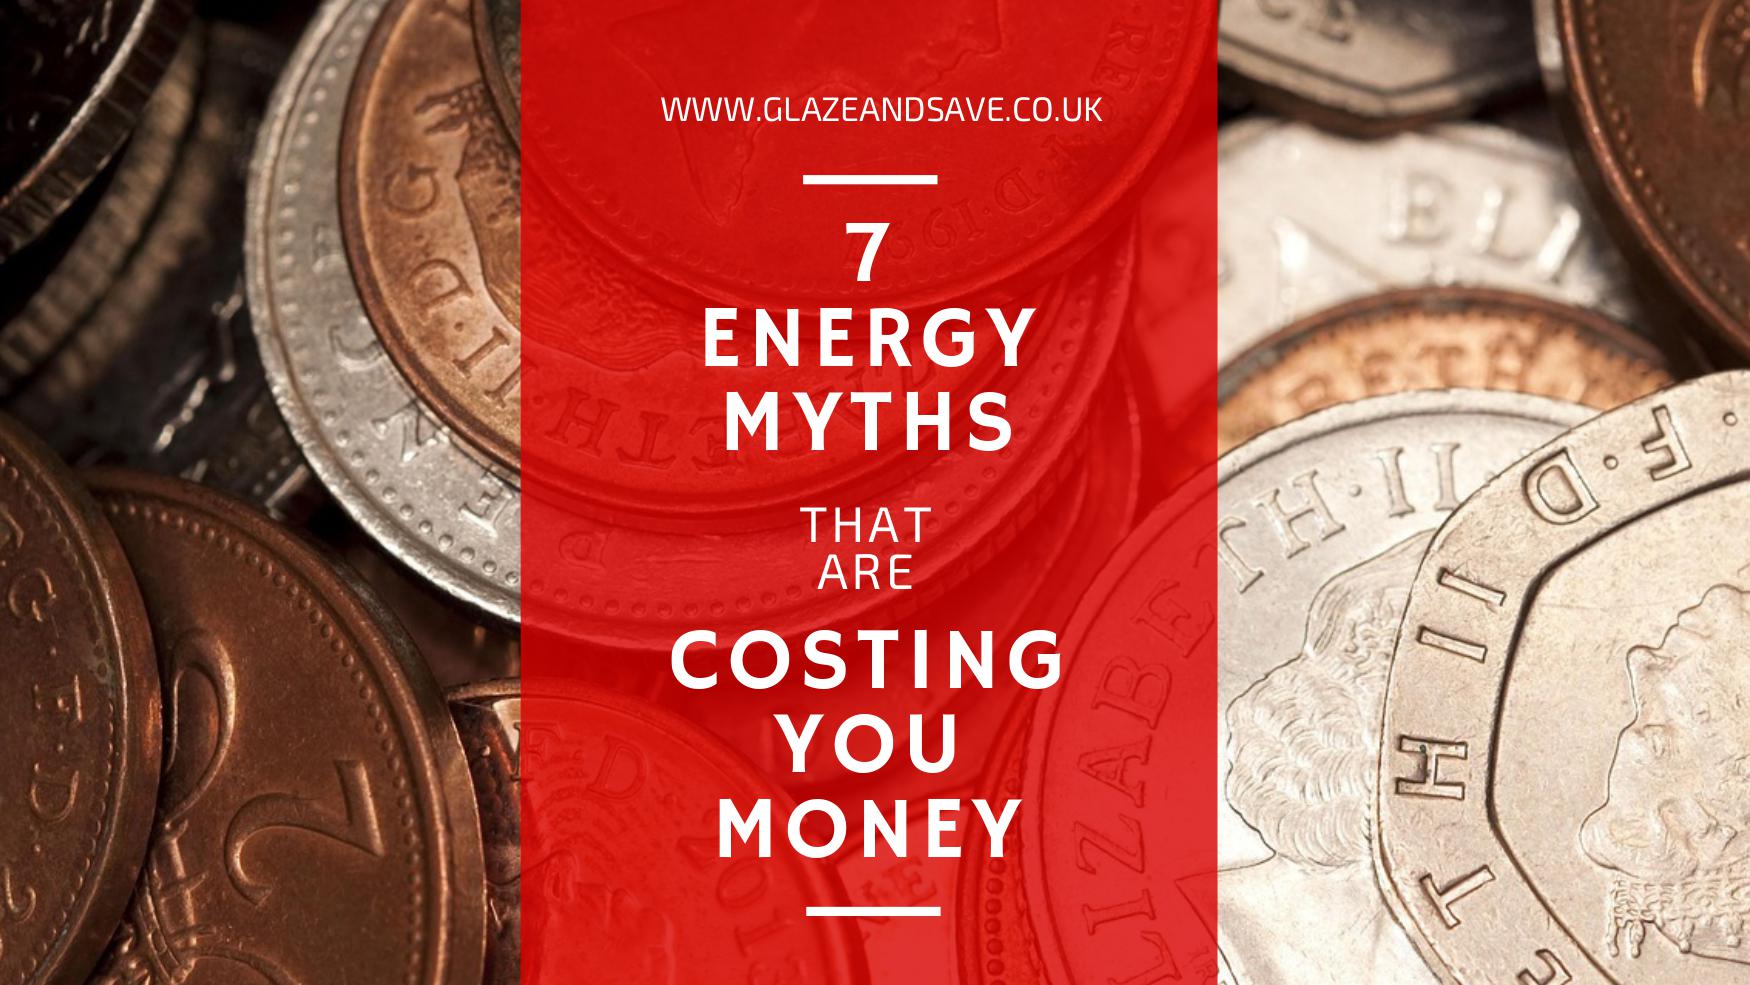 7 Energy Myths that are Costing You Money by Glaze & Save bespoke magnetic secondary glazing and draught proofing specialists based in Scotland